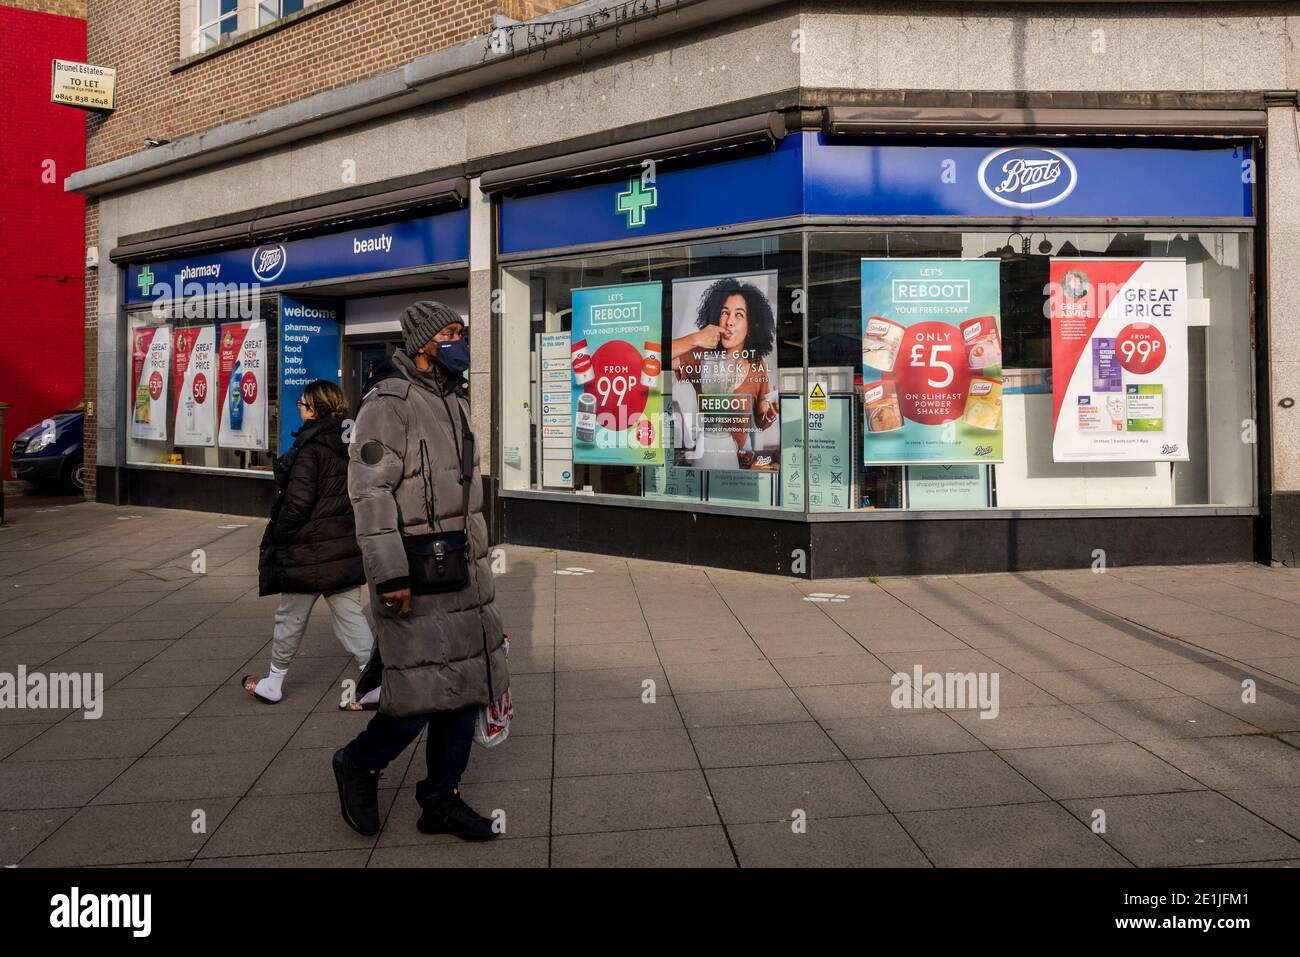 Uxbridge, UK. 7 January 2021. People pass a Boots pharmacy in Uxbridge,  north west London, on the morning that the third national lockdown came in  to effect. It is reported that some